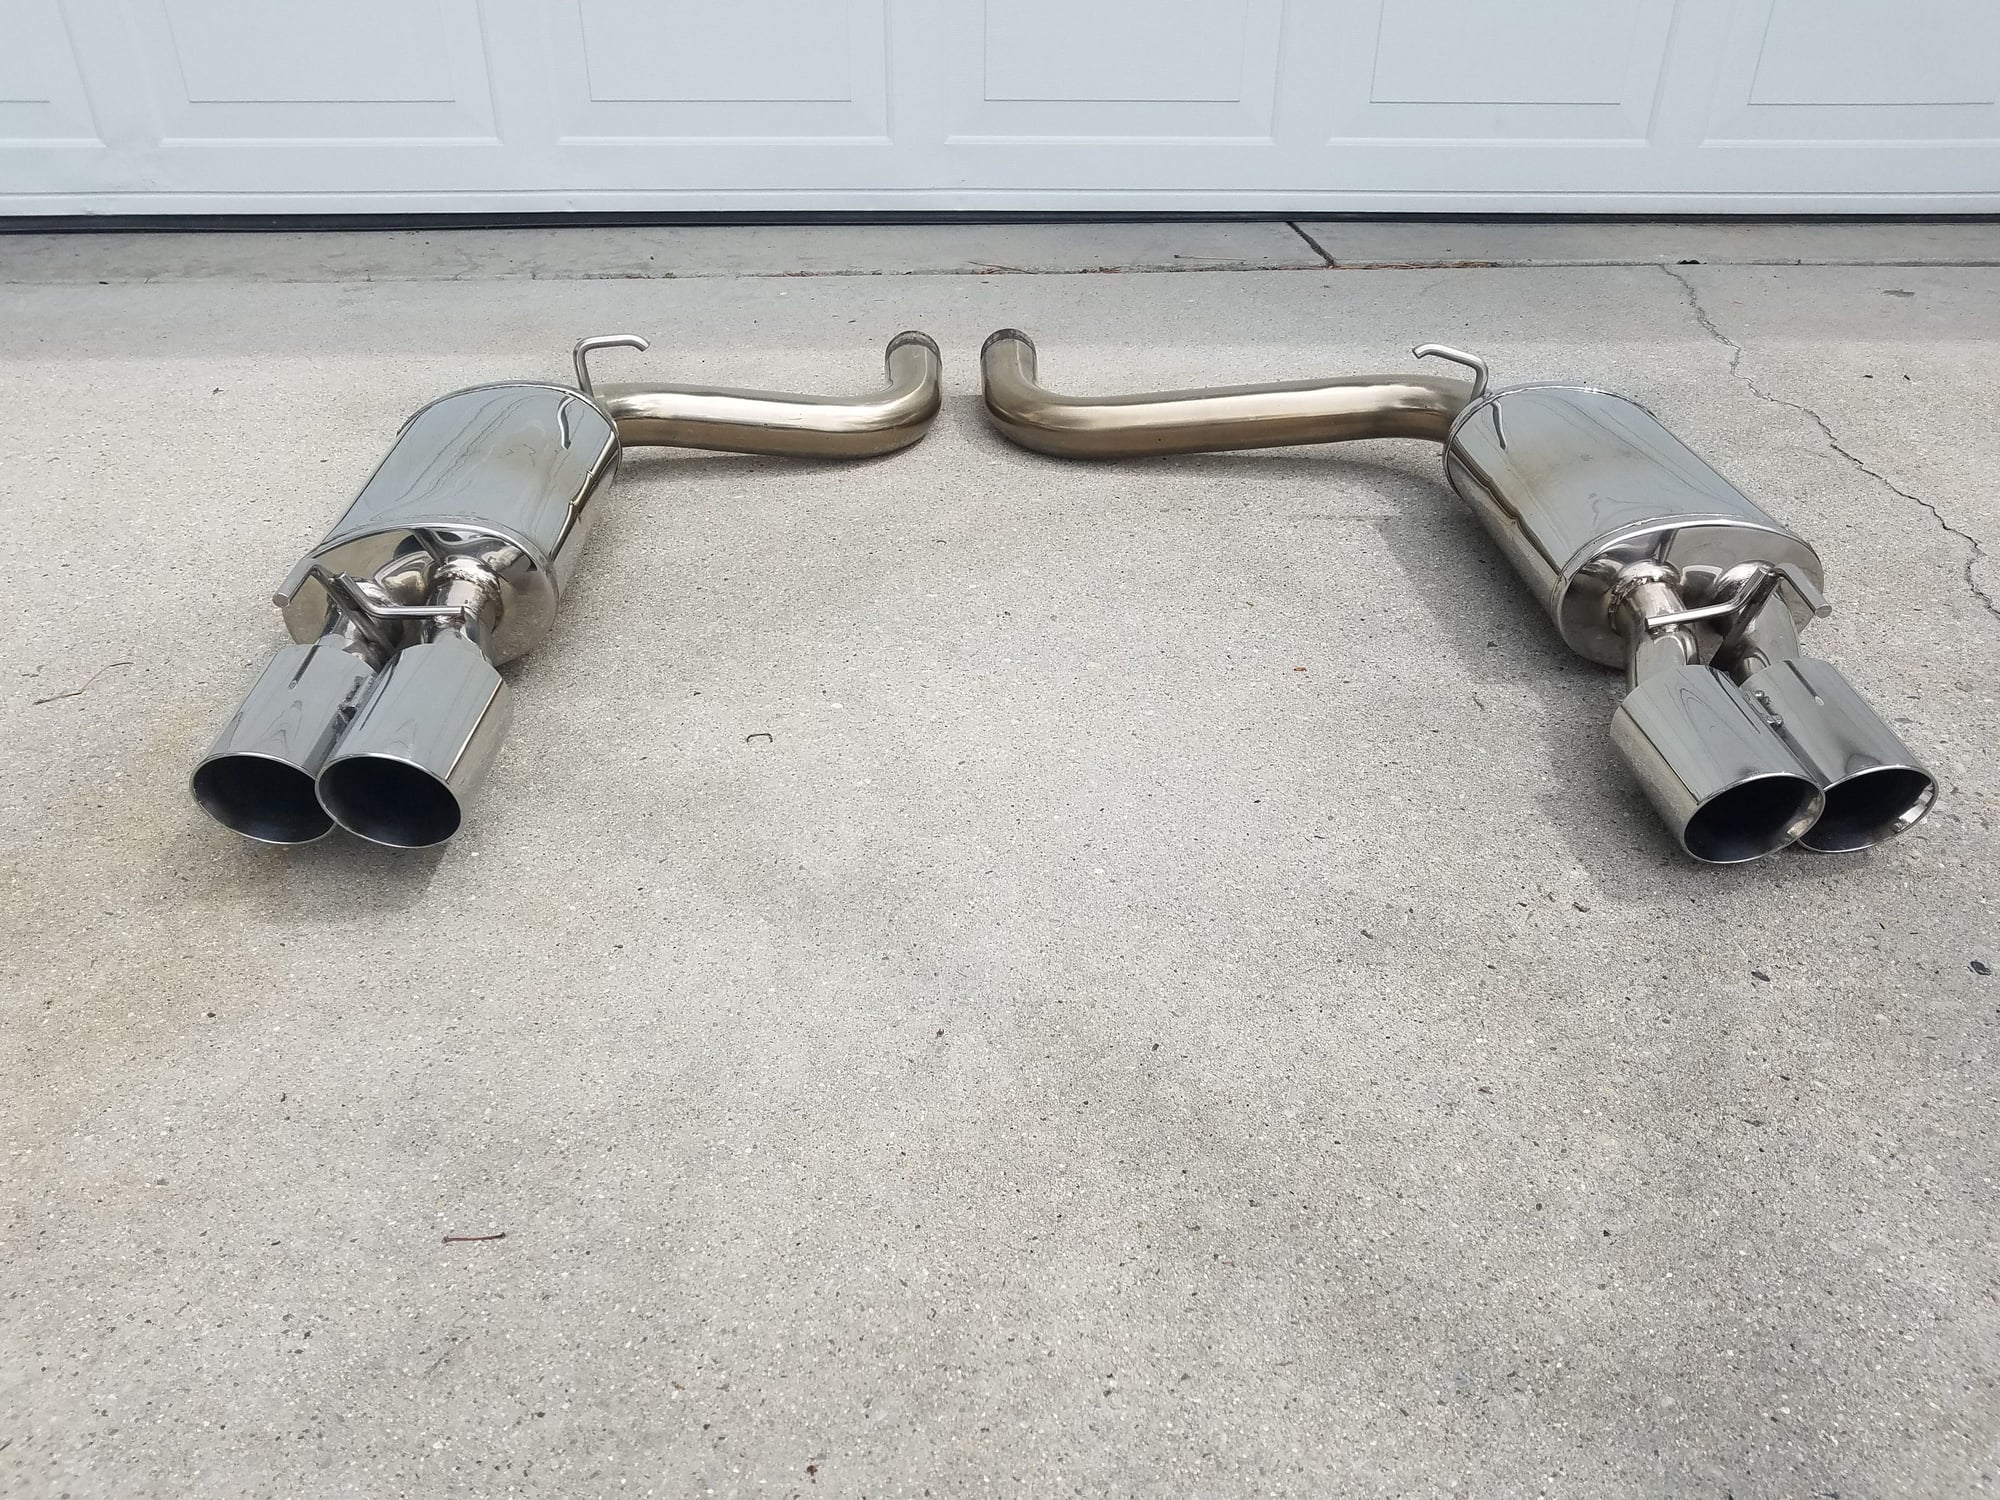 Engine - Exhaust - XF Stainless Steel Exhaust System - Used - 2010 to 2015 Jaguar XF - Sandy, UT 84092, United States